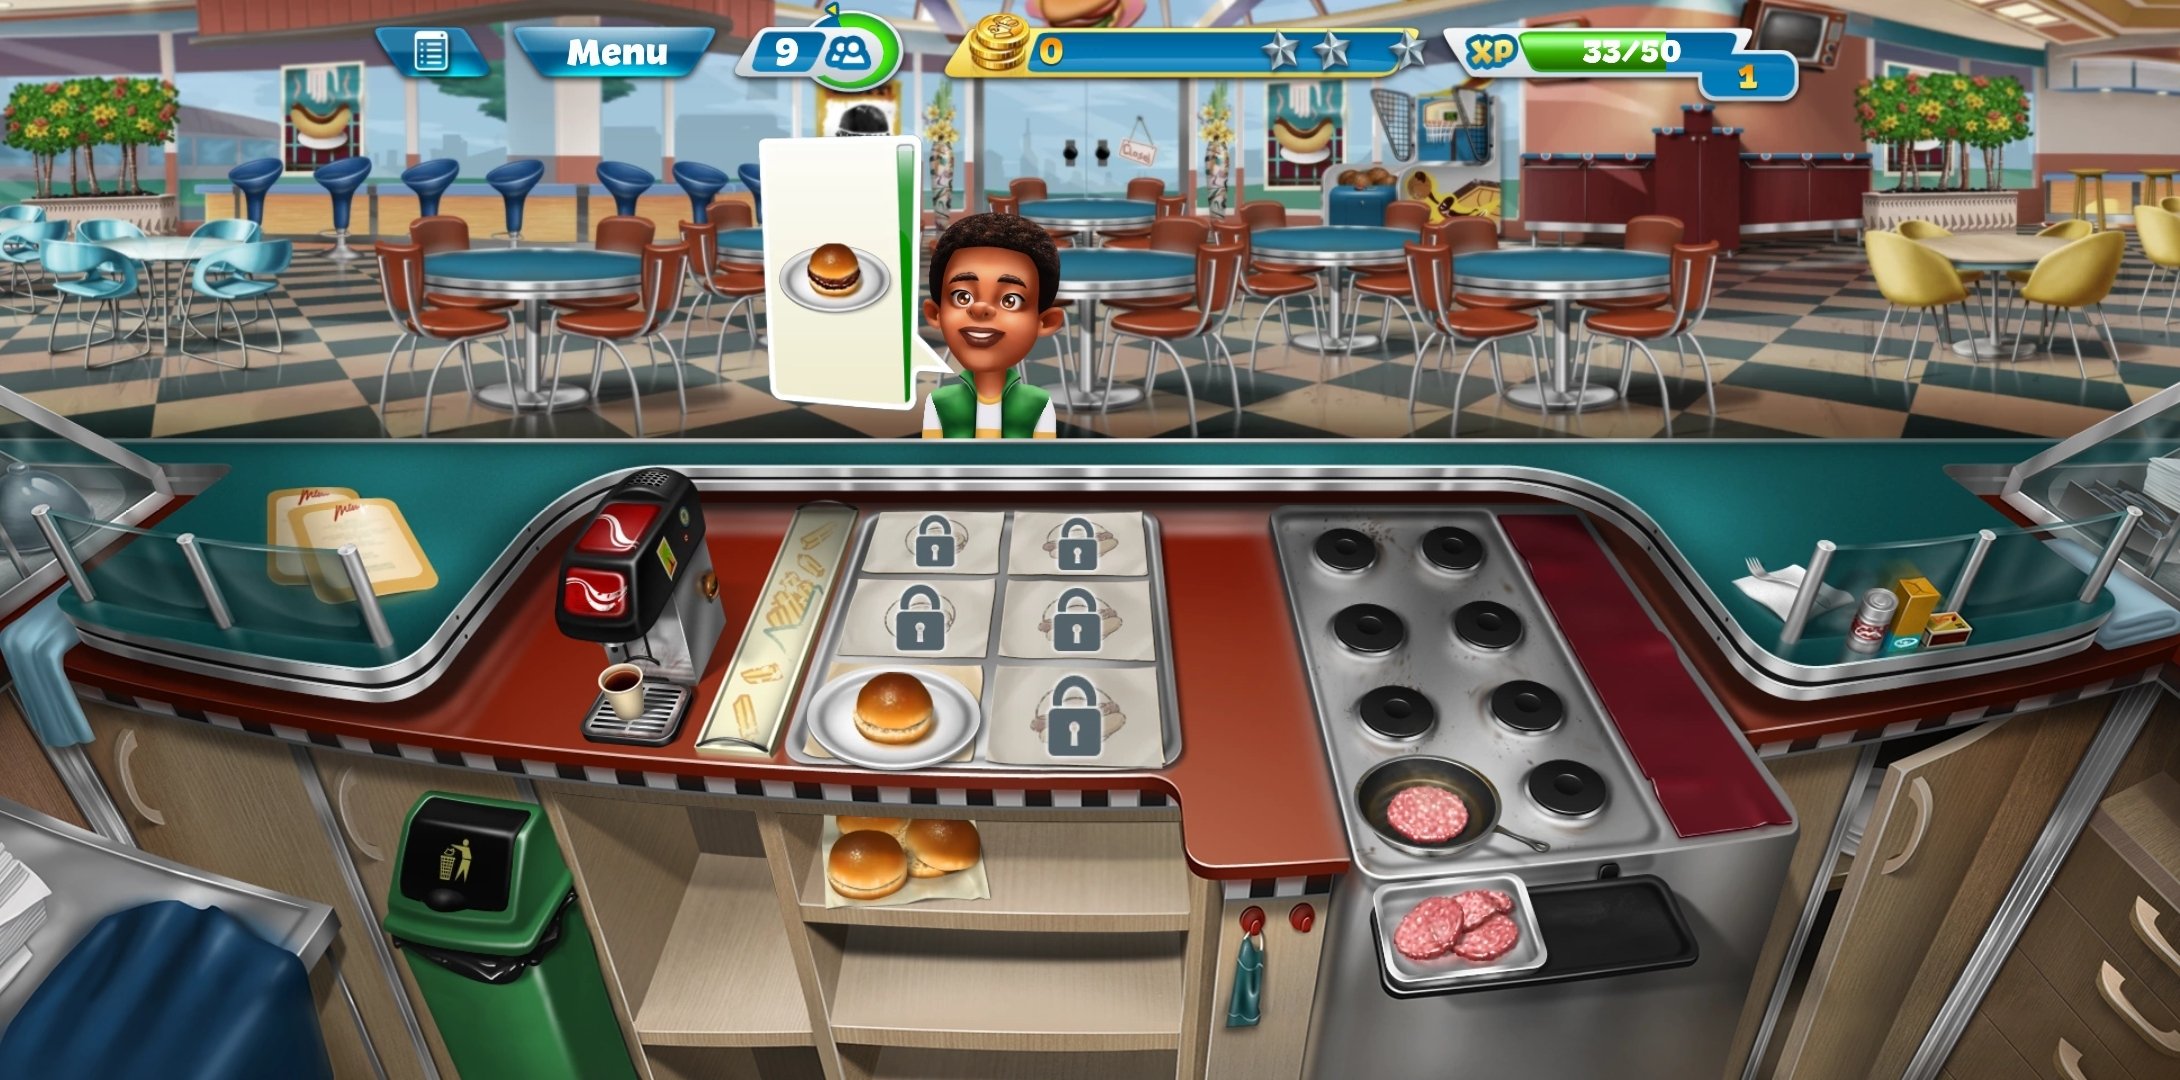 Cooking fever game free download for pc windows 7 free